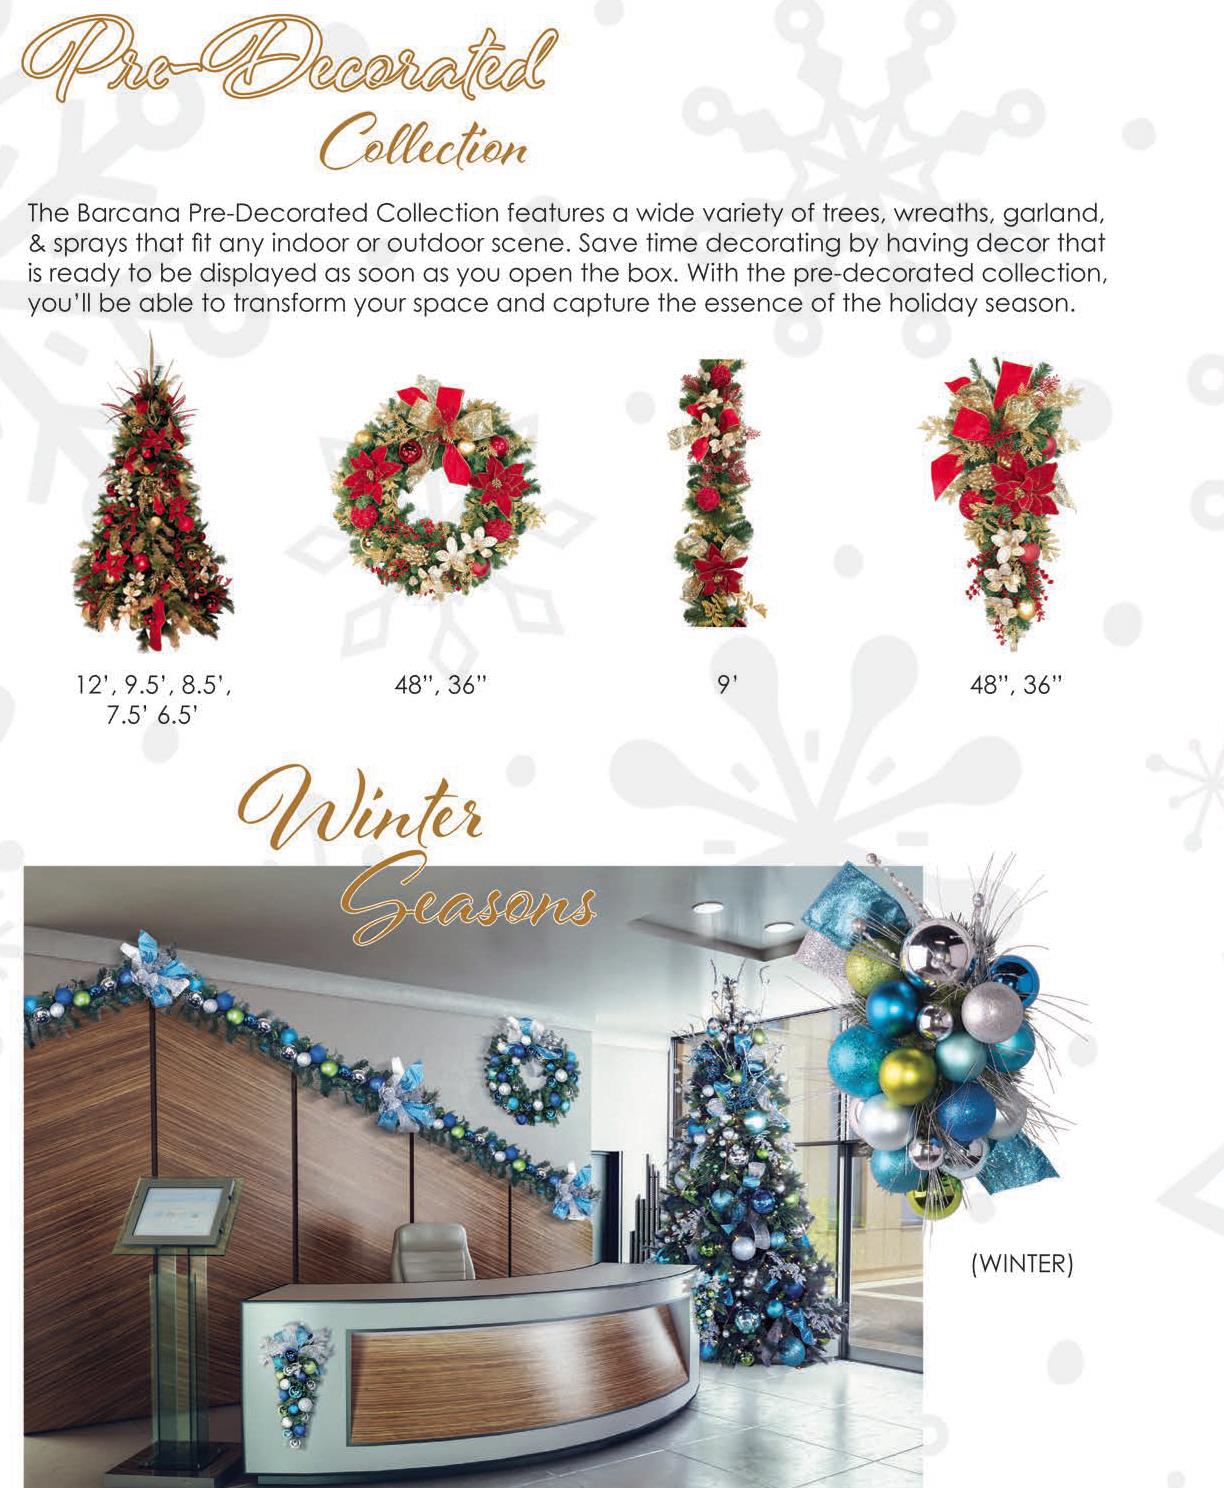 Images of the beautiful pre-decorated large Christmas wreaths